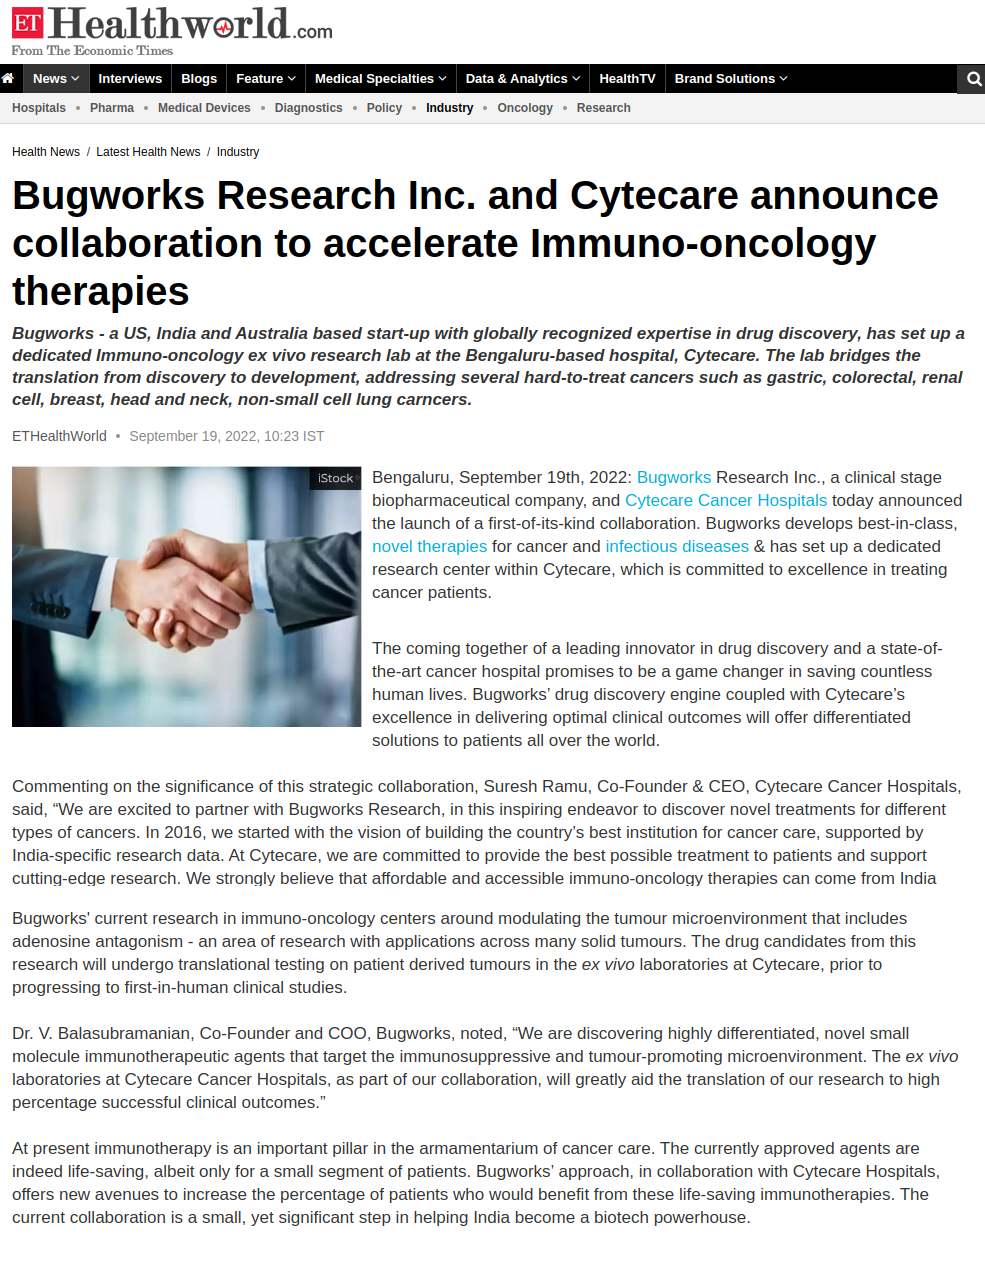 Bugworks Research Inc. and Cytecare  announce collaboration to accelerate Immuno-oncology therapies